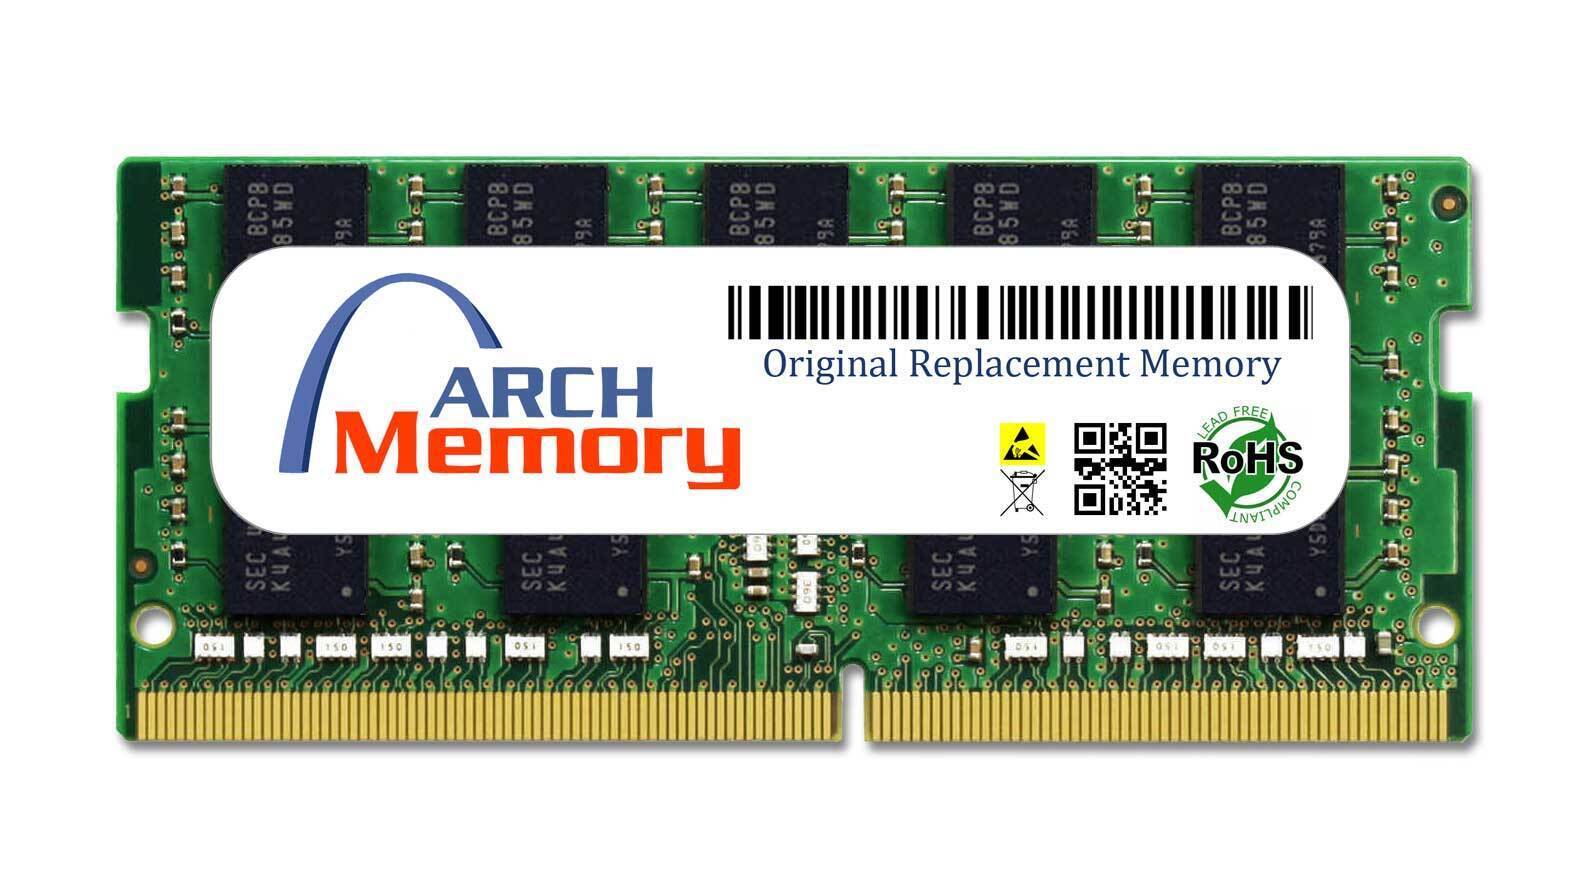 Arch Memory KSM29SED8/32HA 32GB Replacement for Kingston DDR4 SODIMM RAM